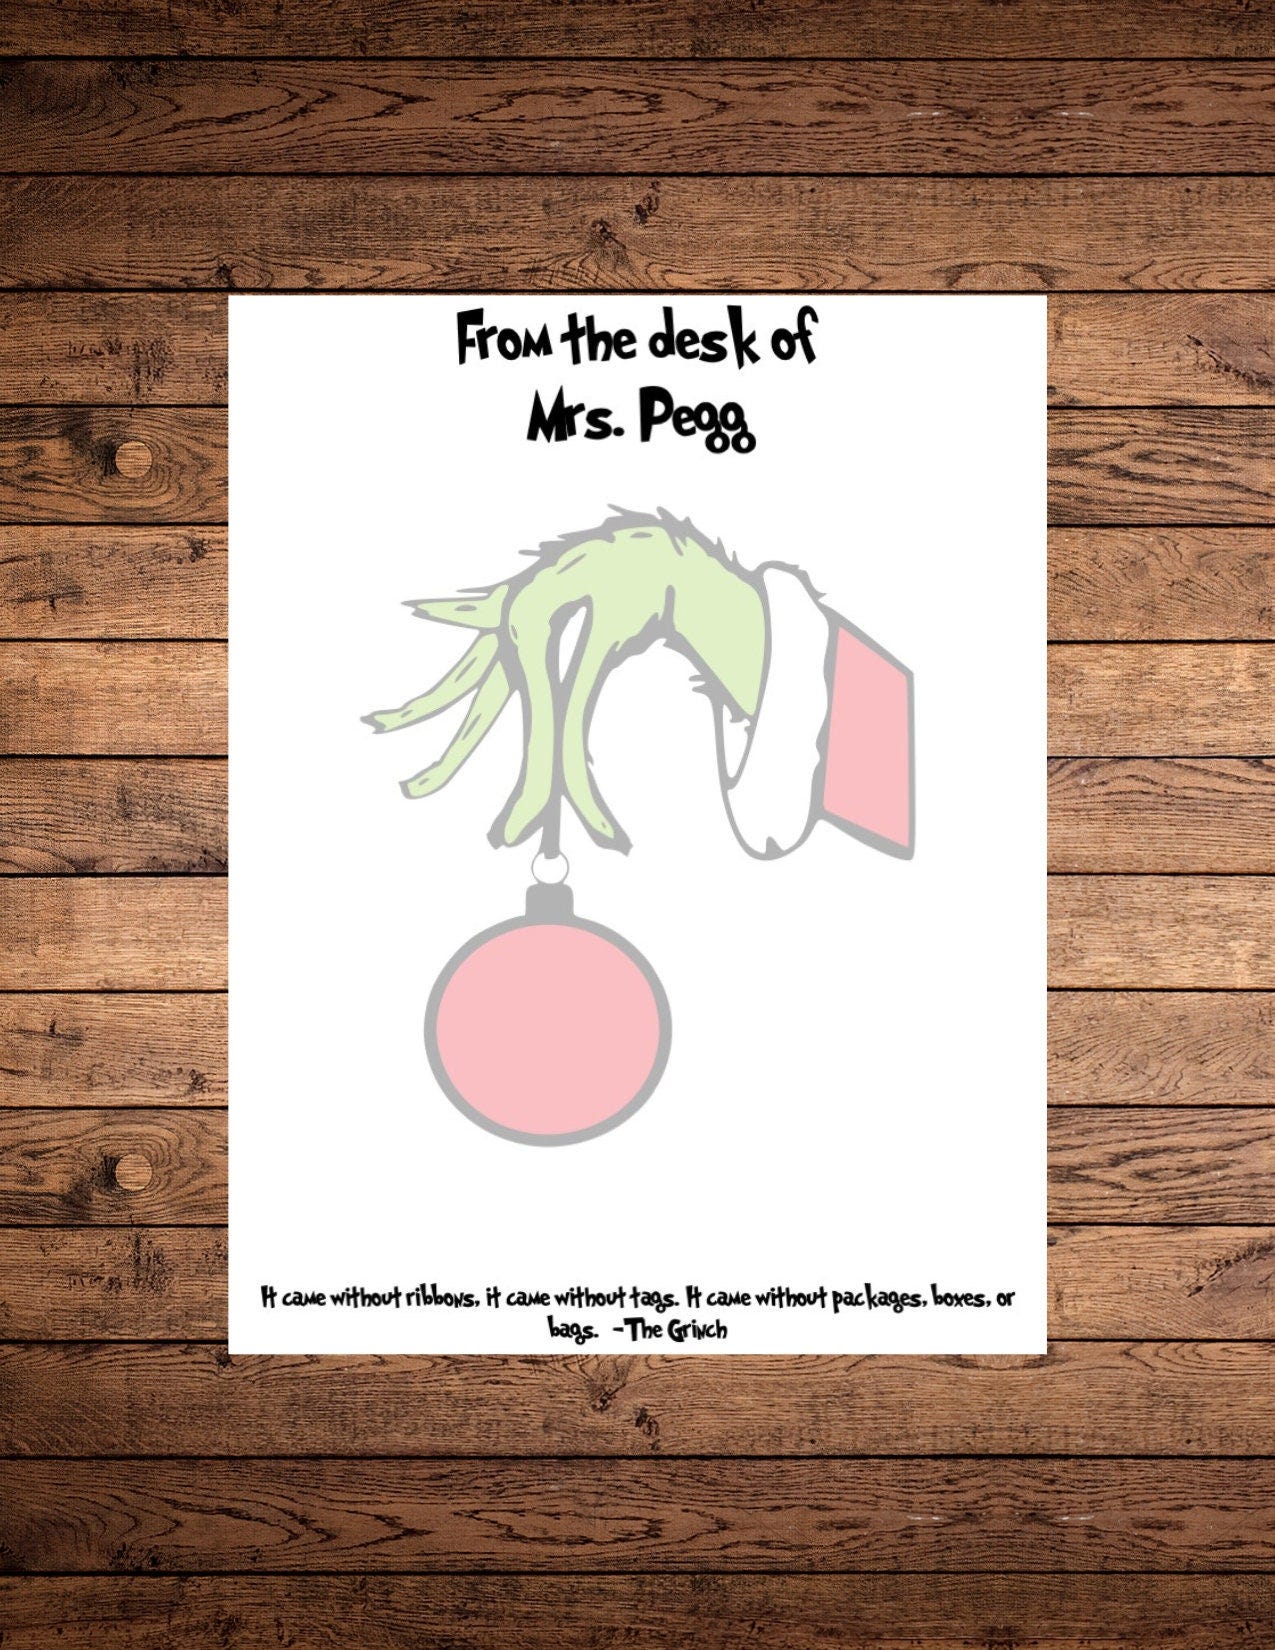 The Grinch hand ornament Quote Notepad, Christmas, Personalized Notepad, Teacher gift, Notepad for Her Him, Grinch Movie Paper Stationary